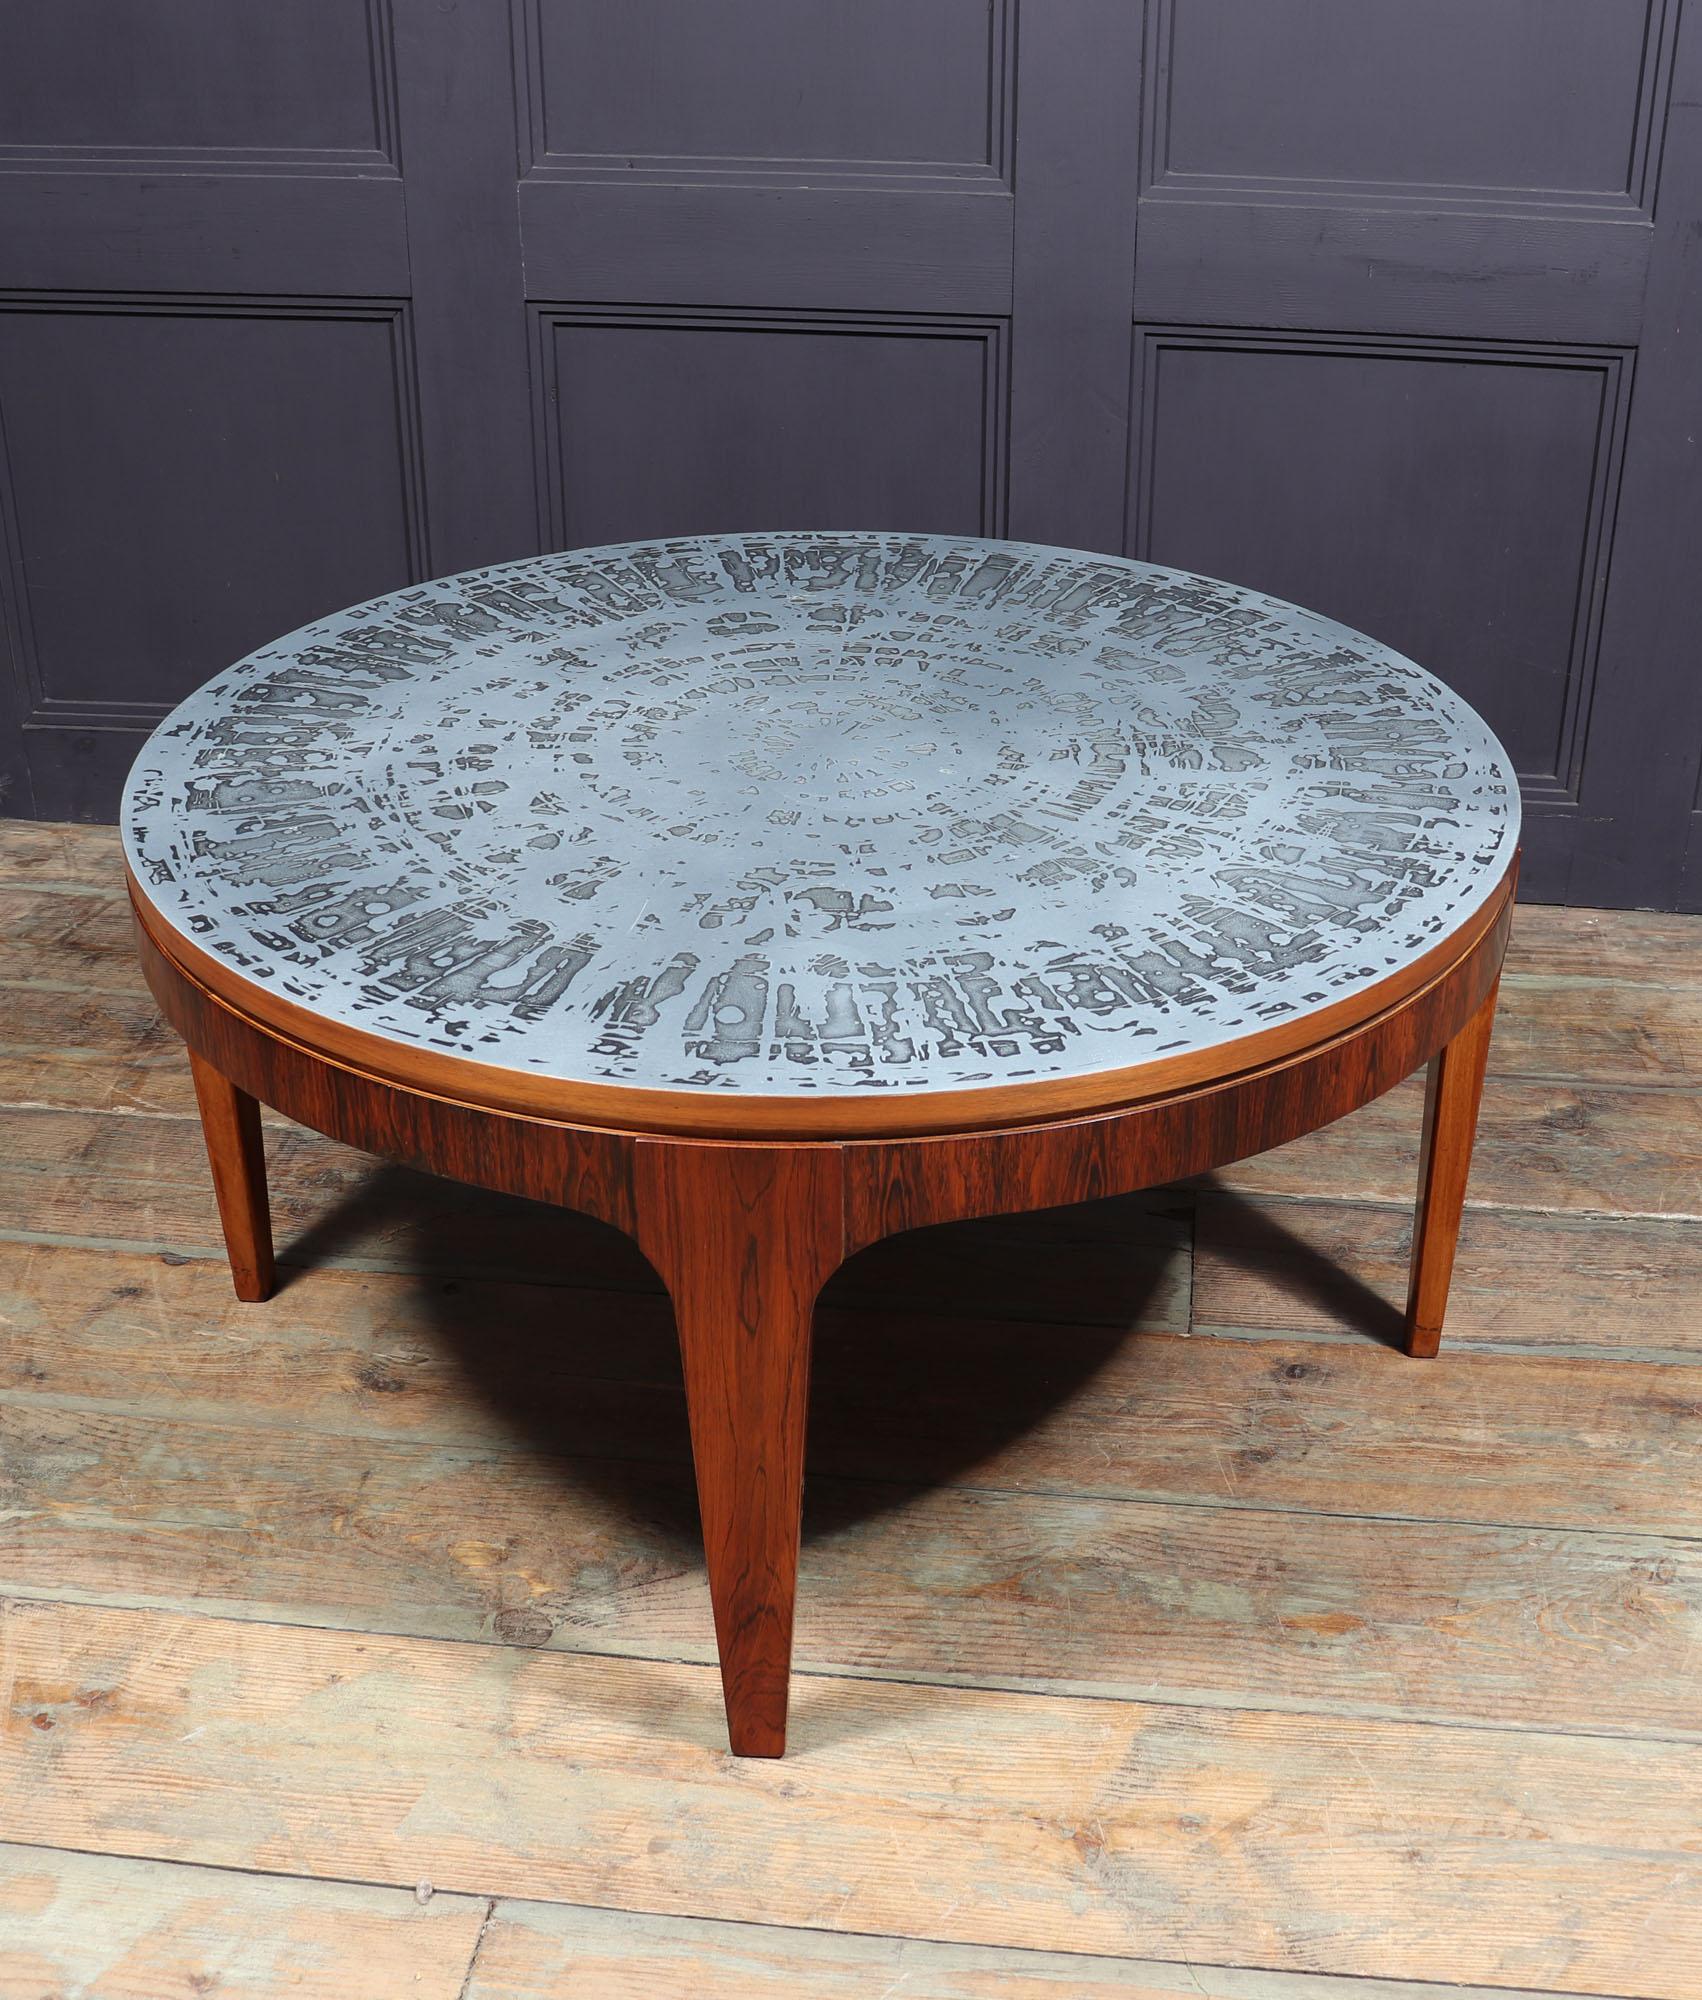 A very stylish Rosewood Scandinavian coffee table with acid etched aluminium top with four legs. The wood has been re finished and the table is in very good condition throughout

Age: c1960

Style: Mid-Century Modern 

Origin : Scandinavian